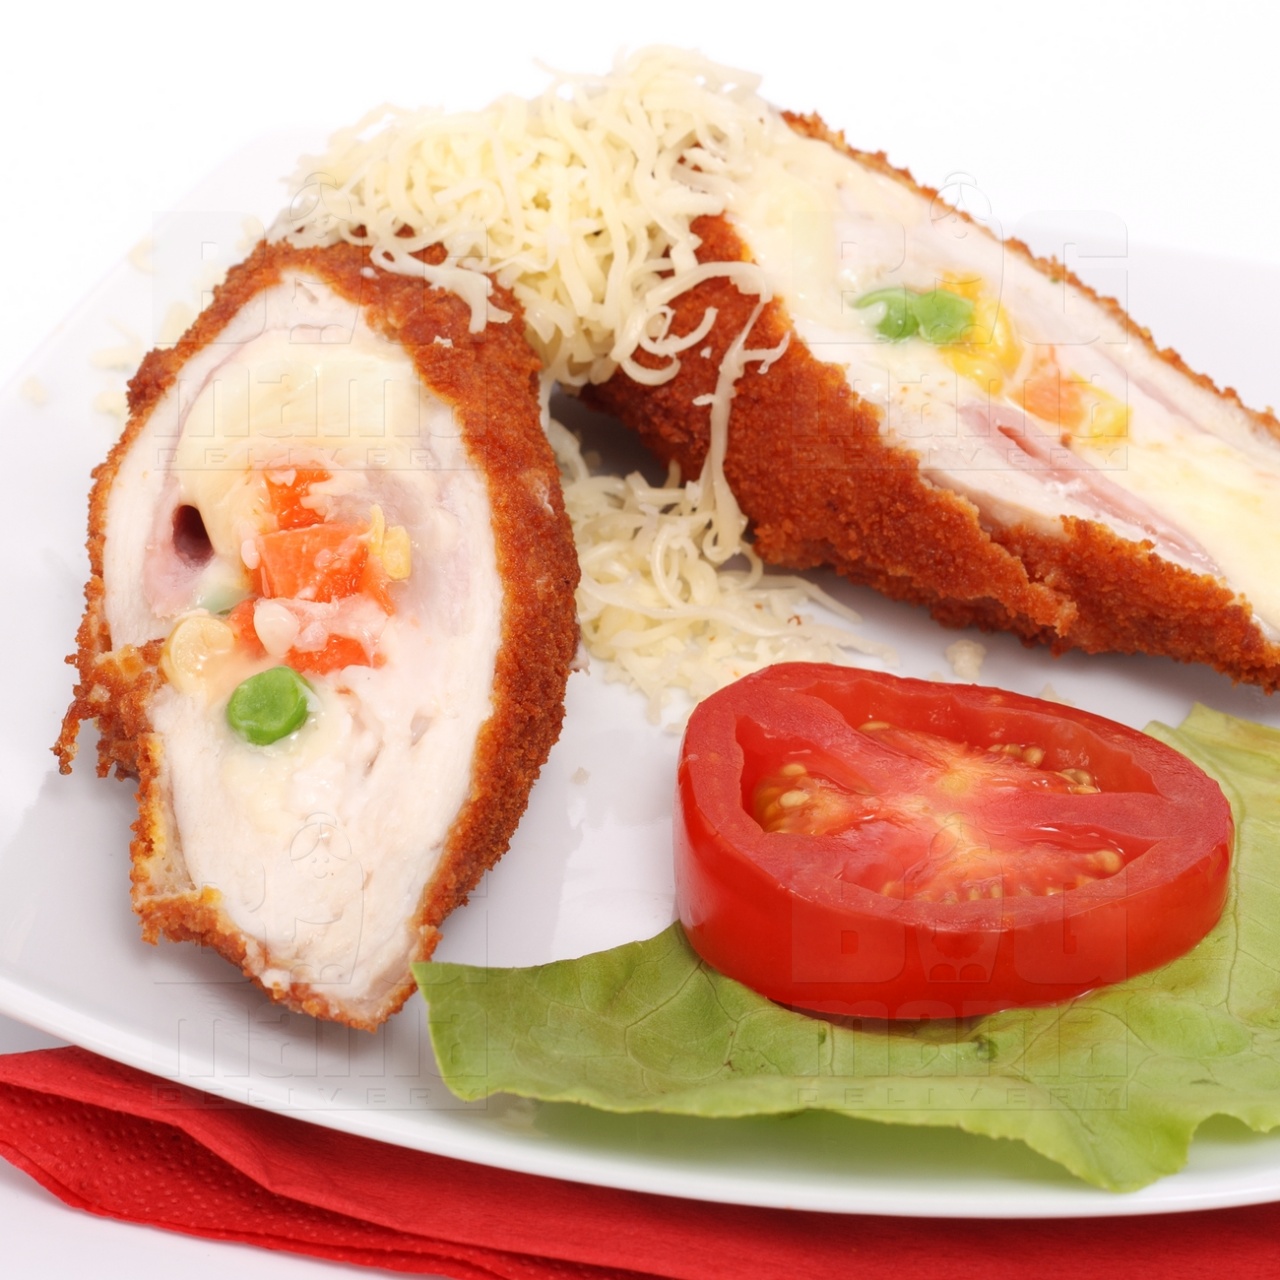 Product #7 image - Big Roll from chicken breast